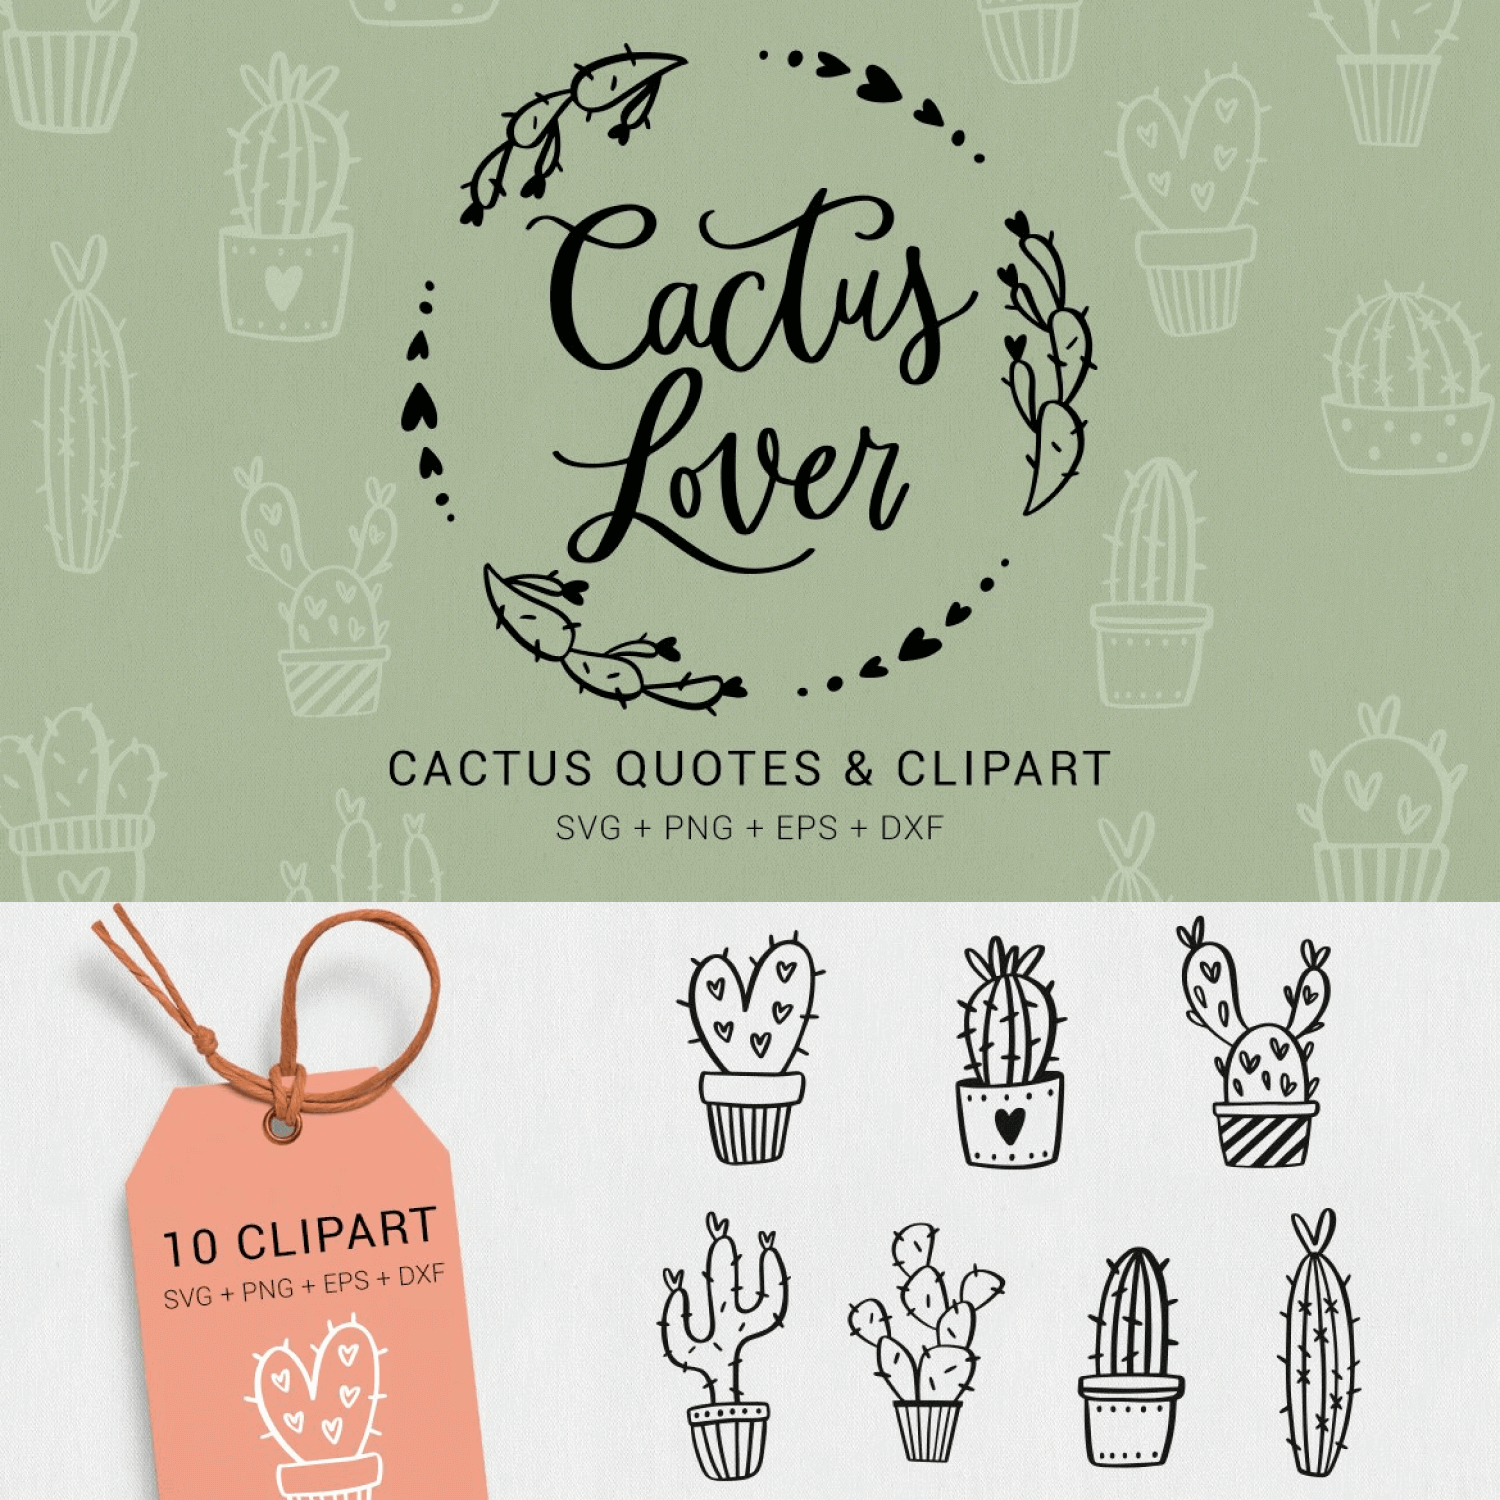 10 Clipart of Cactus Lover.